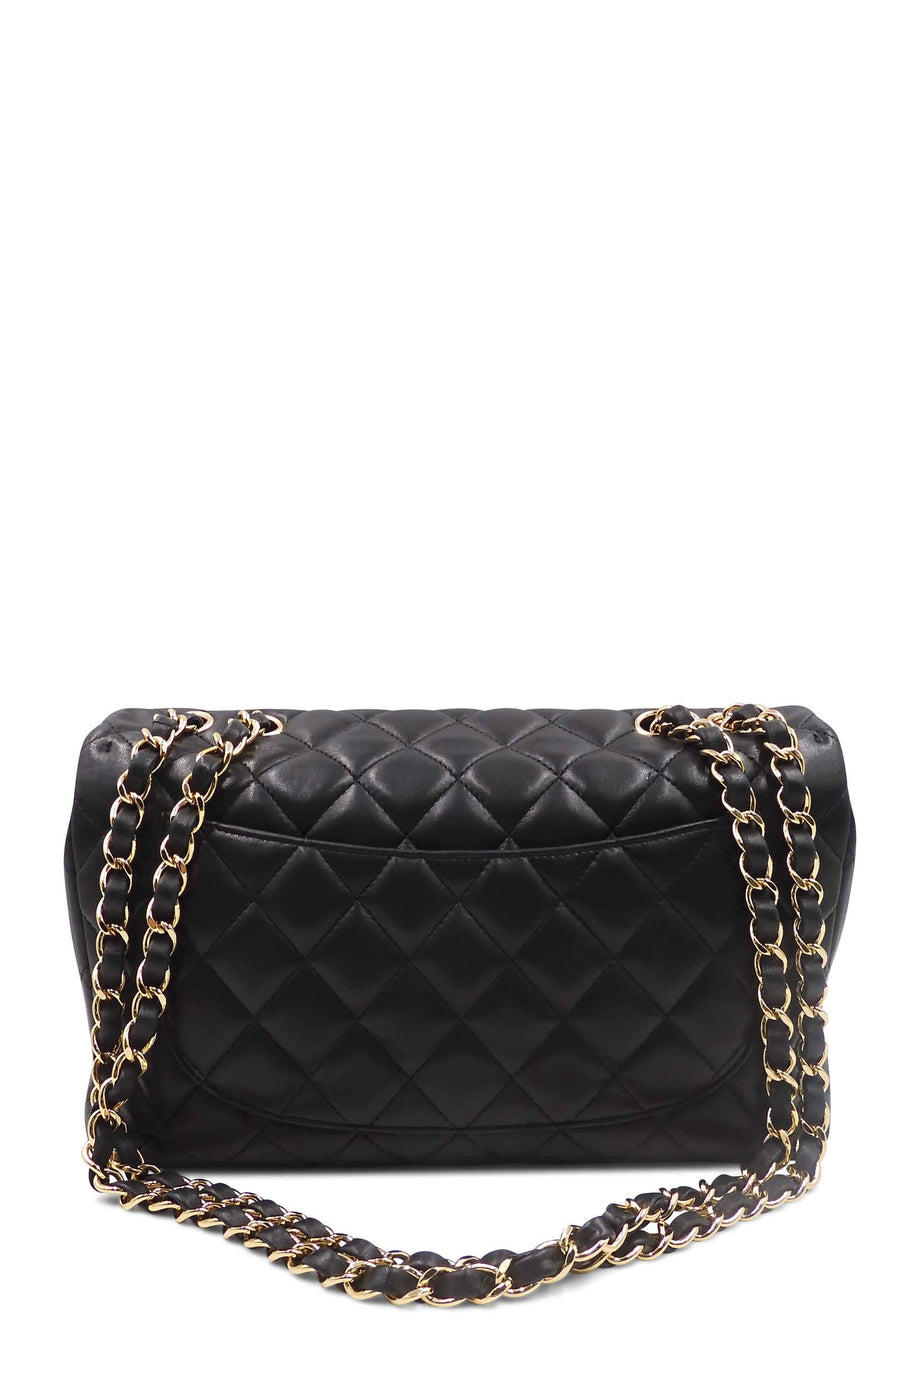 Buy Authentic, Preloved Chanel Quilted Lambskin Jumbo Classic SIngle Flap  Bag with Gold Hardware Black Bags from Second Edit by Style Theory